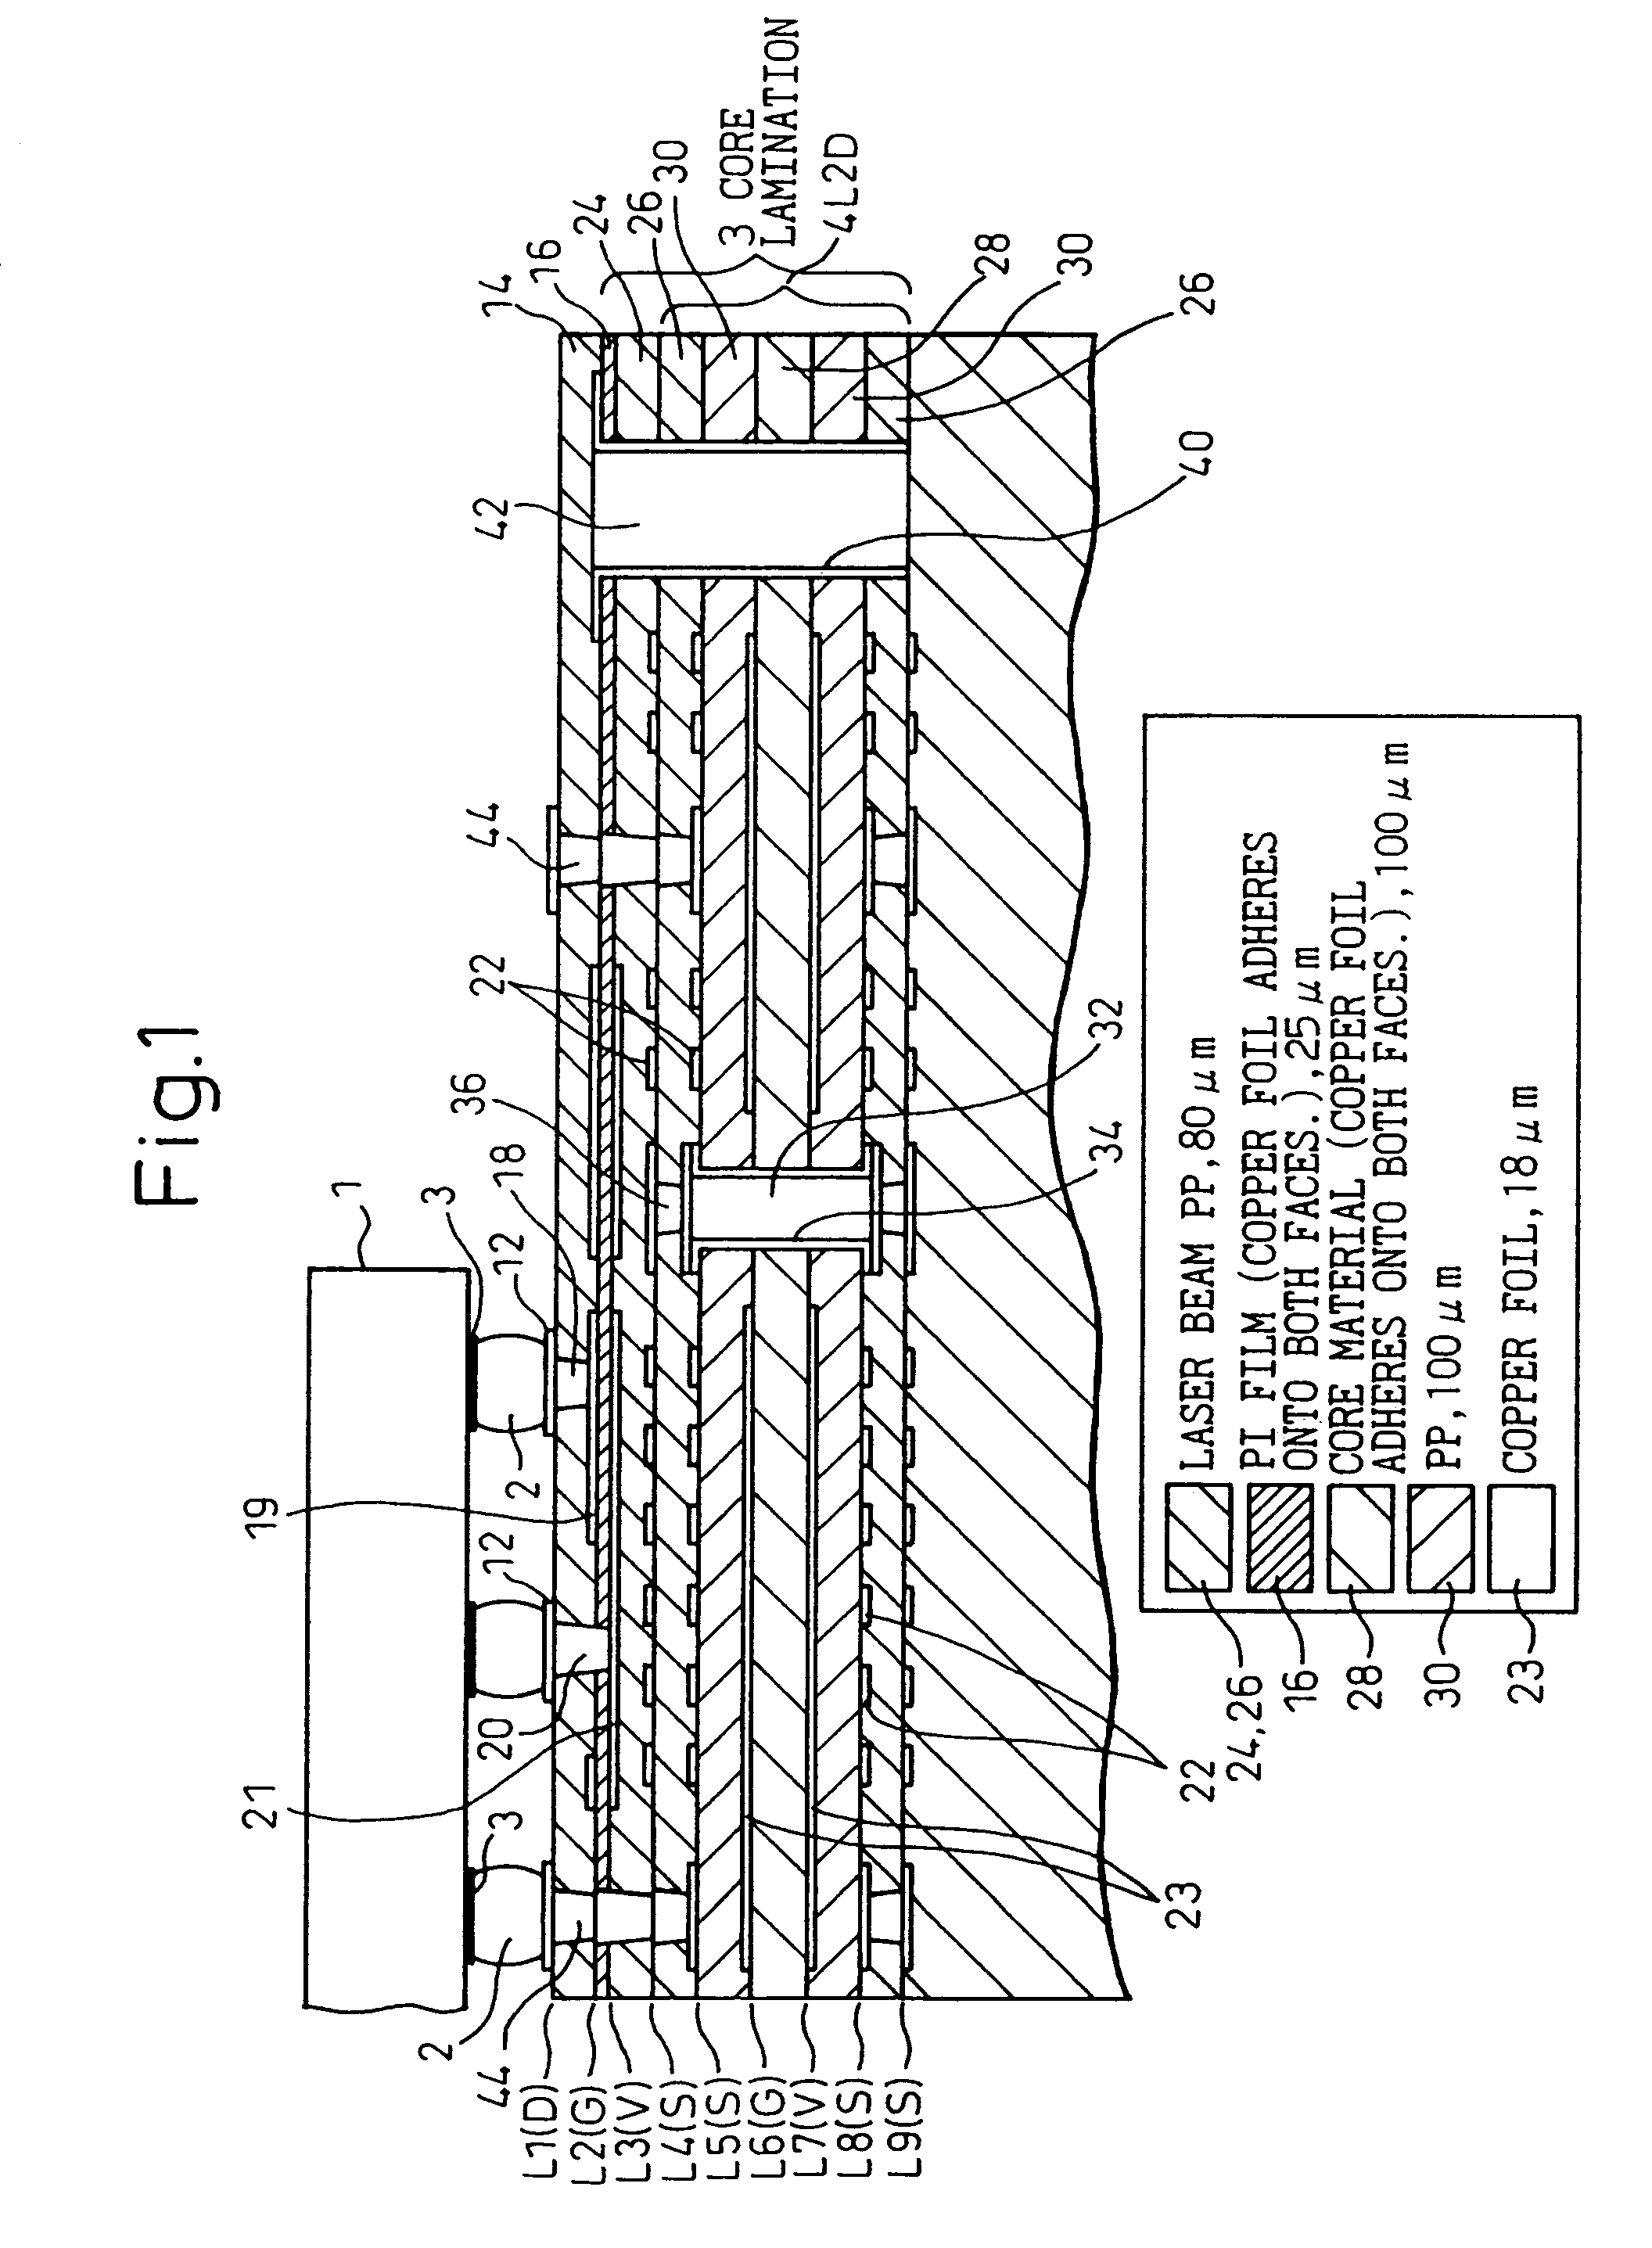 Multilayer wiring circuit board